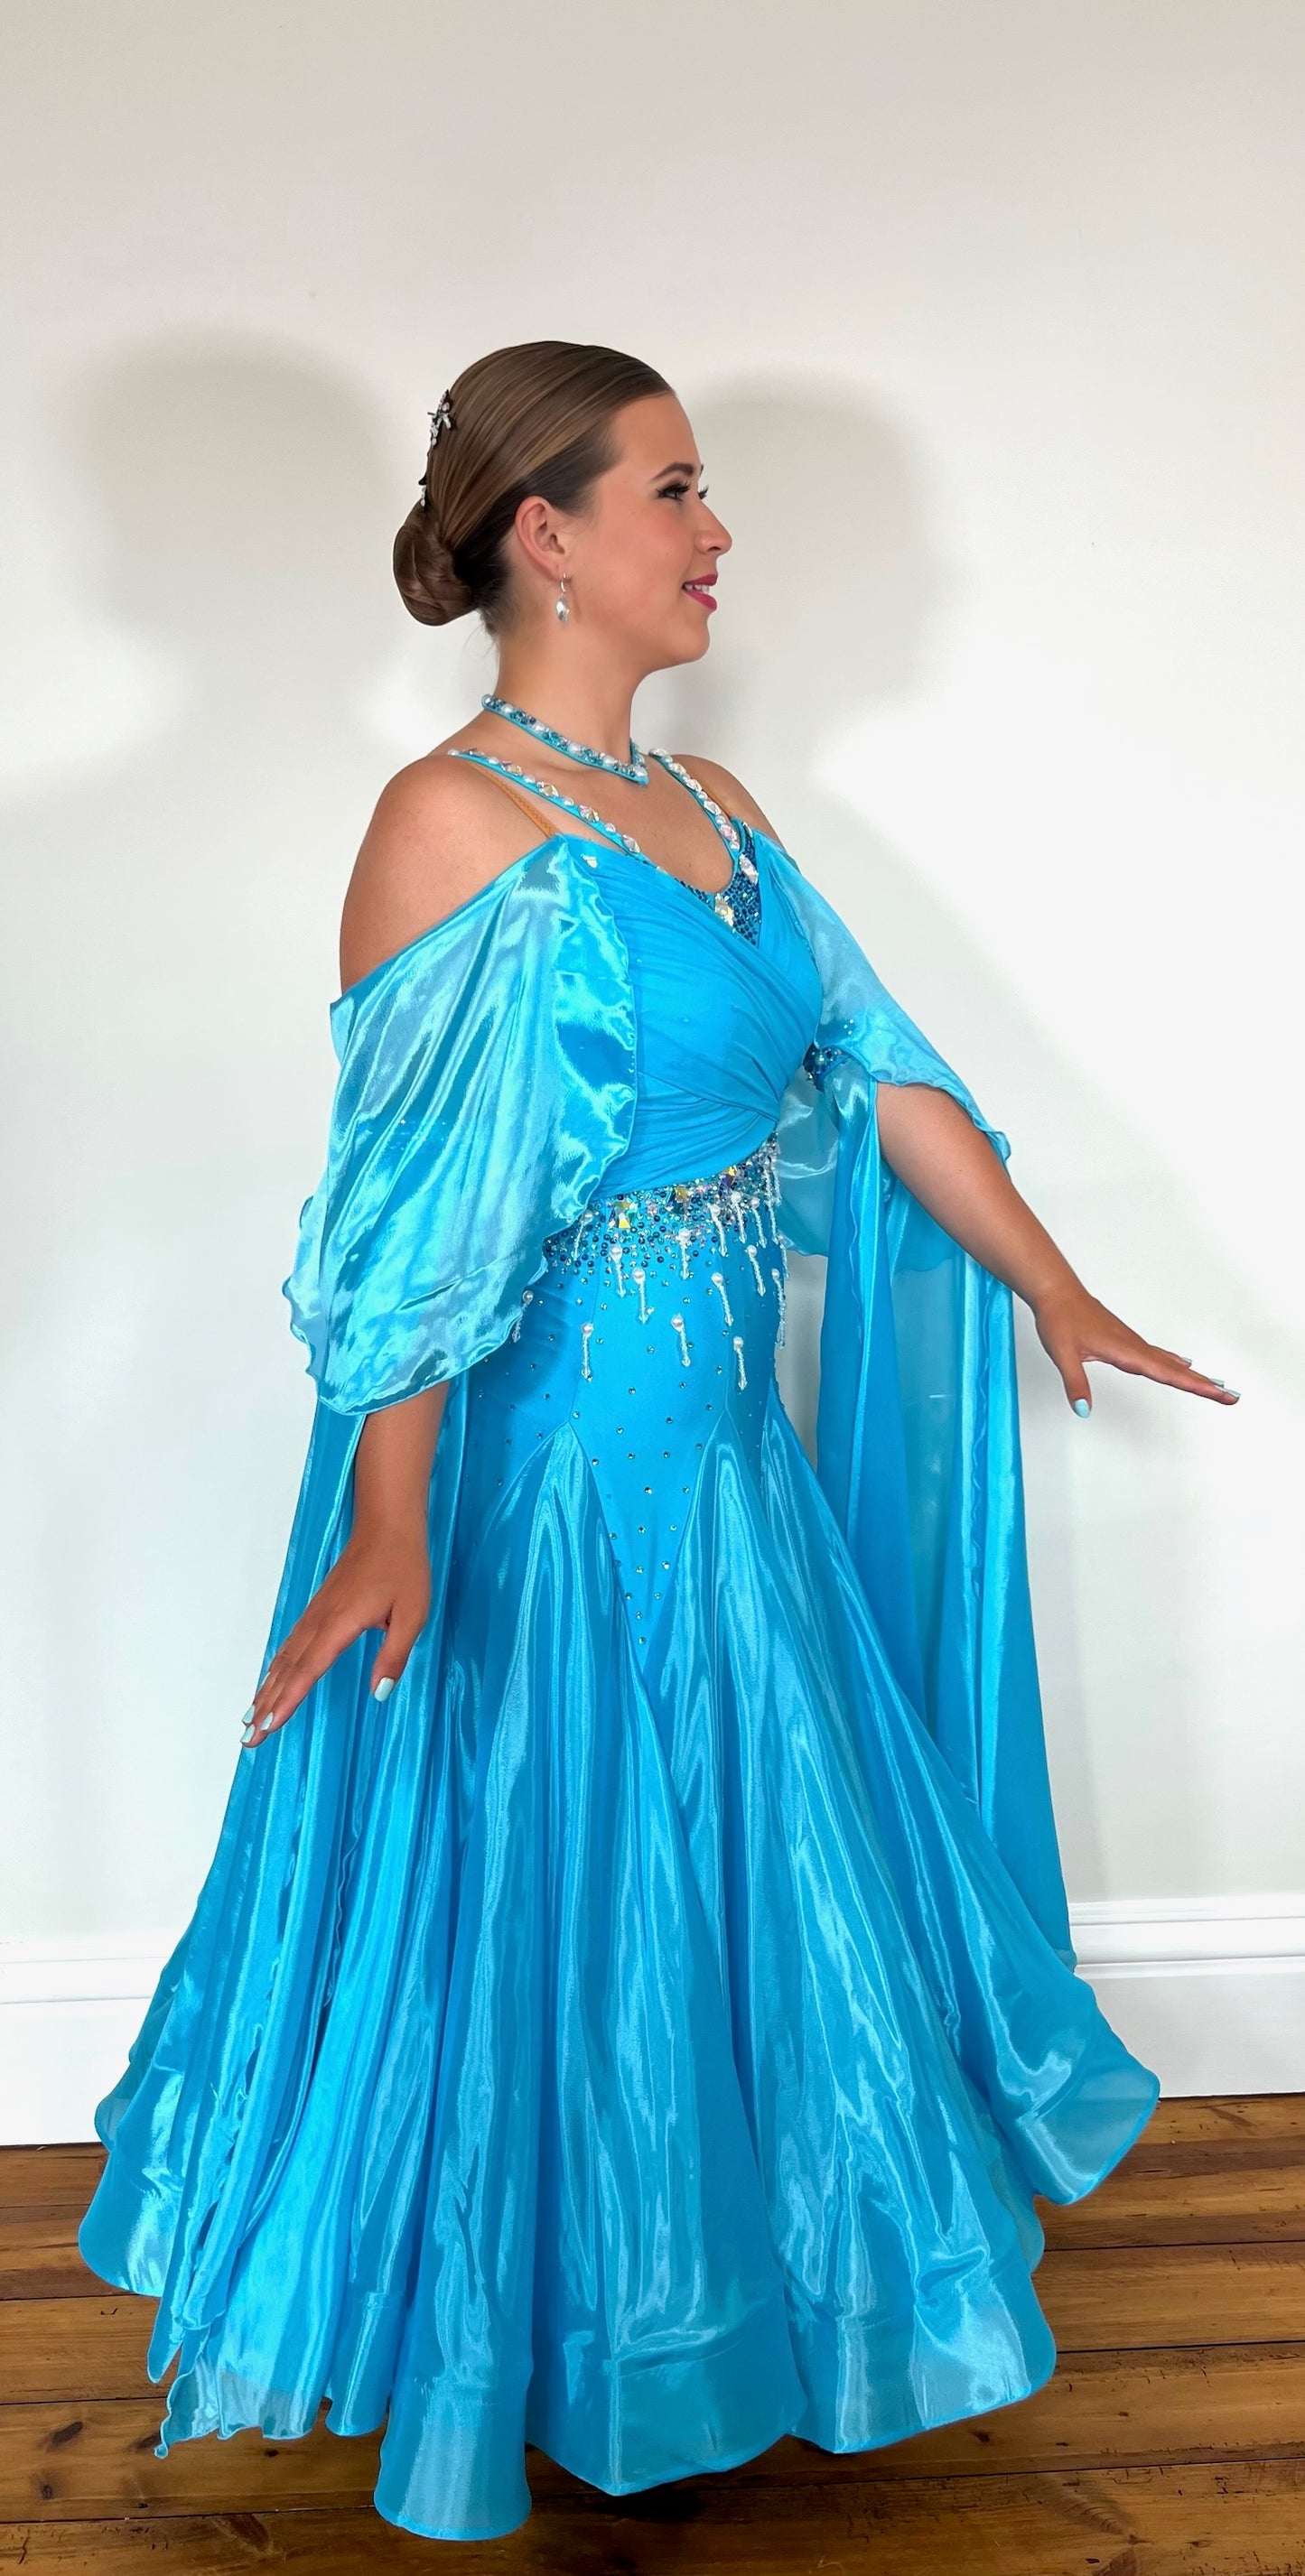 322 Paradise Blue Ballroom Dress with shoulder drapes. Comes with separate arm cuff floats. Decorated with Pearls, blue and AB stones. Detailed pearl strings to back